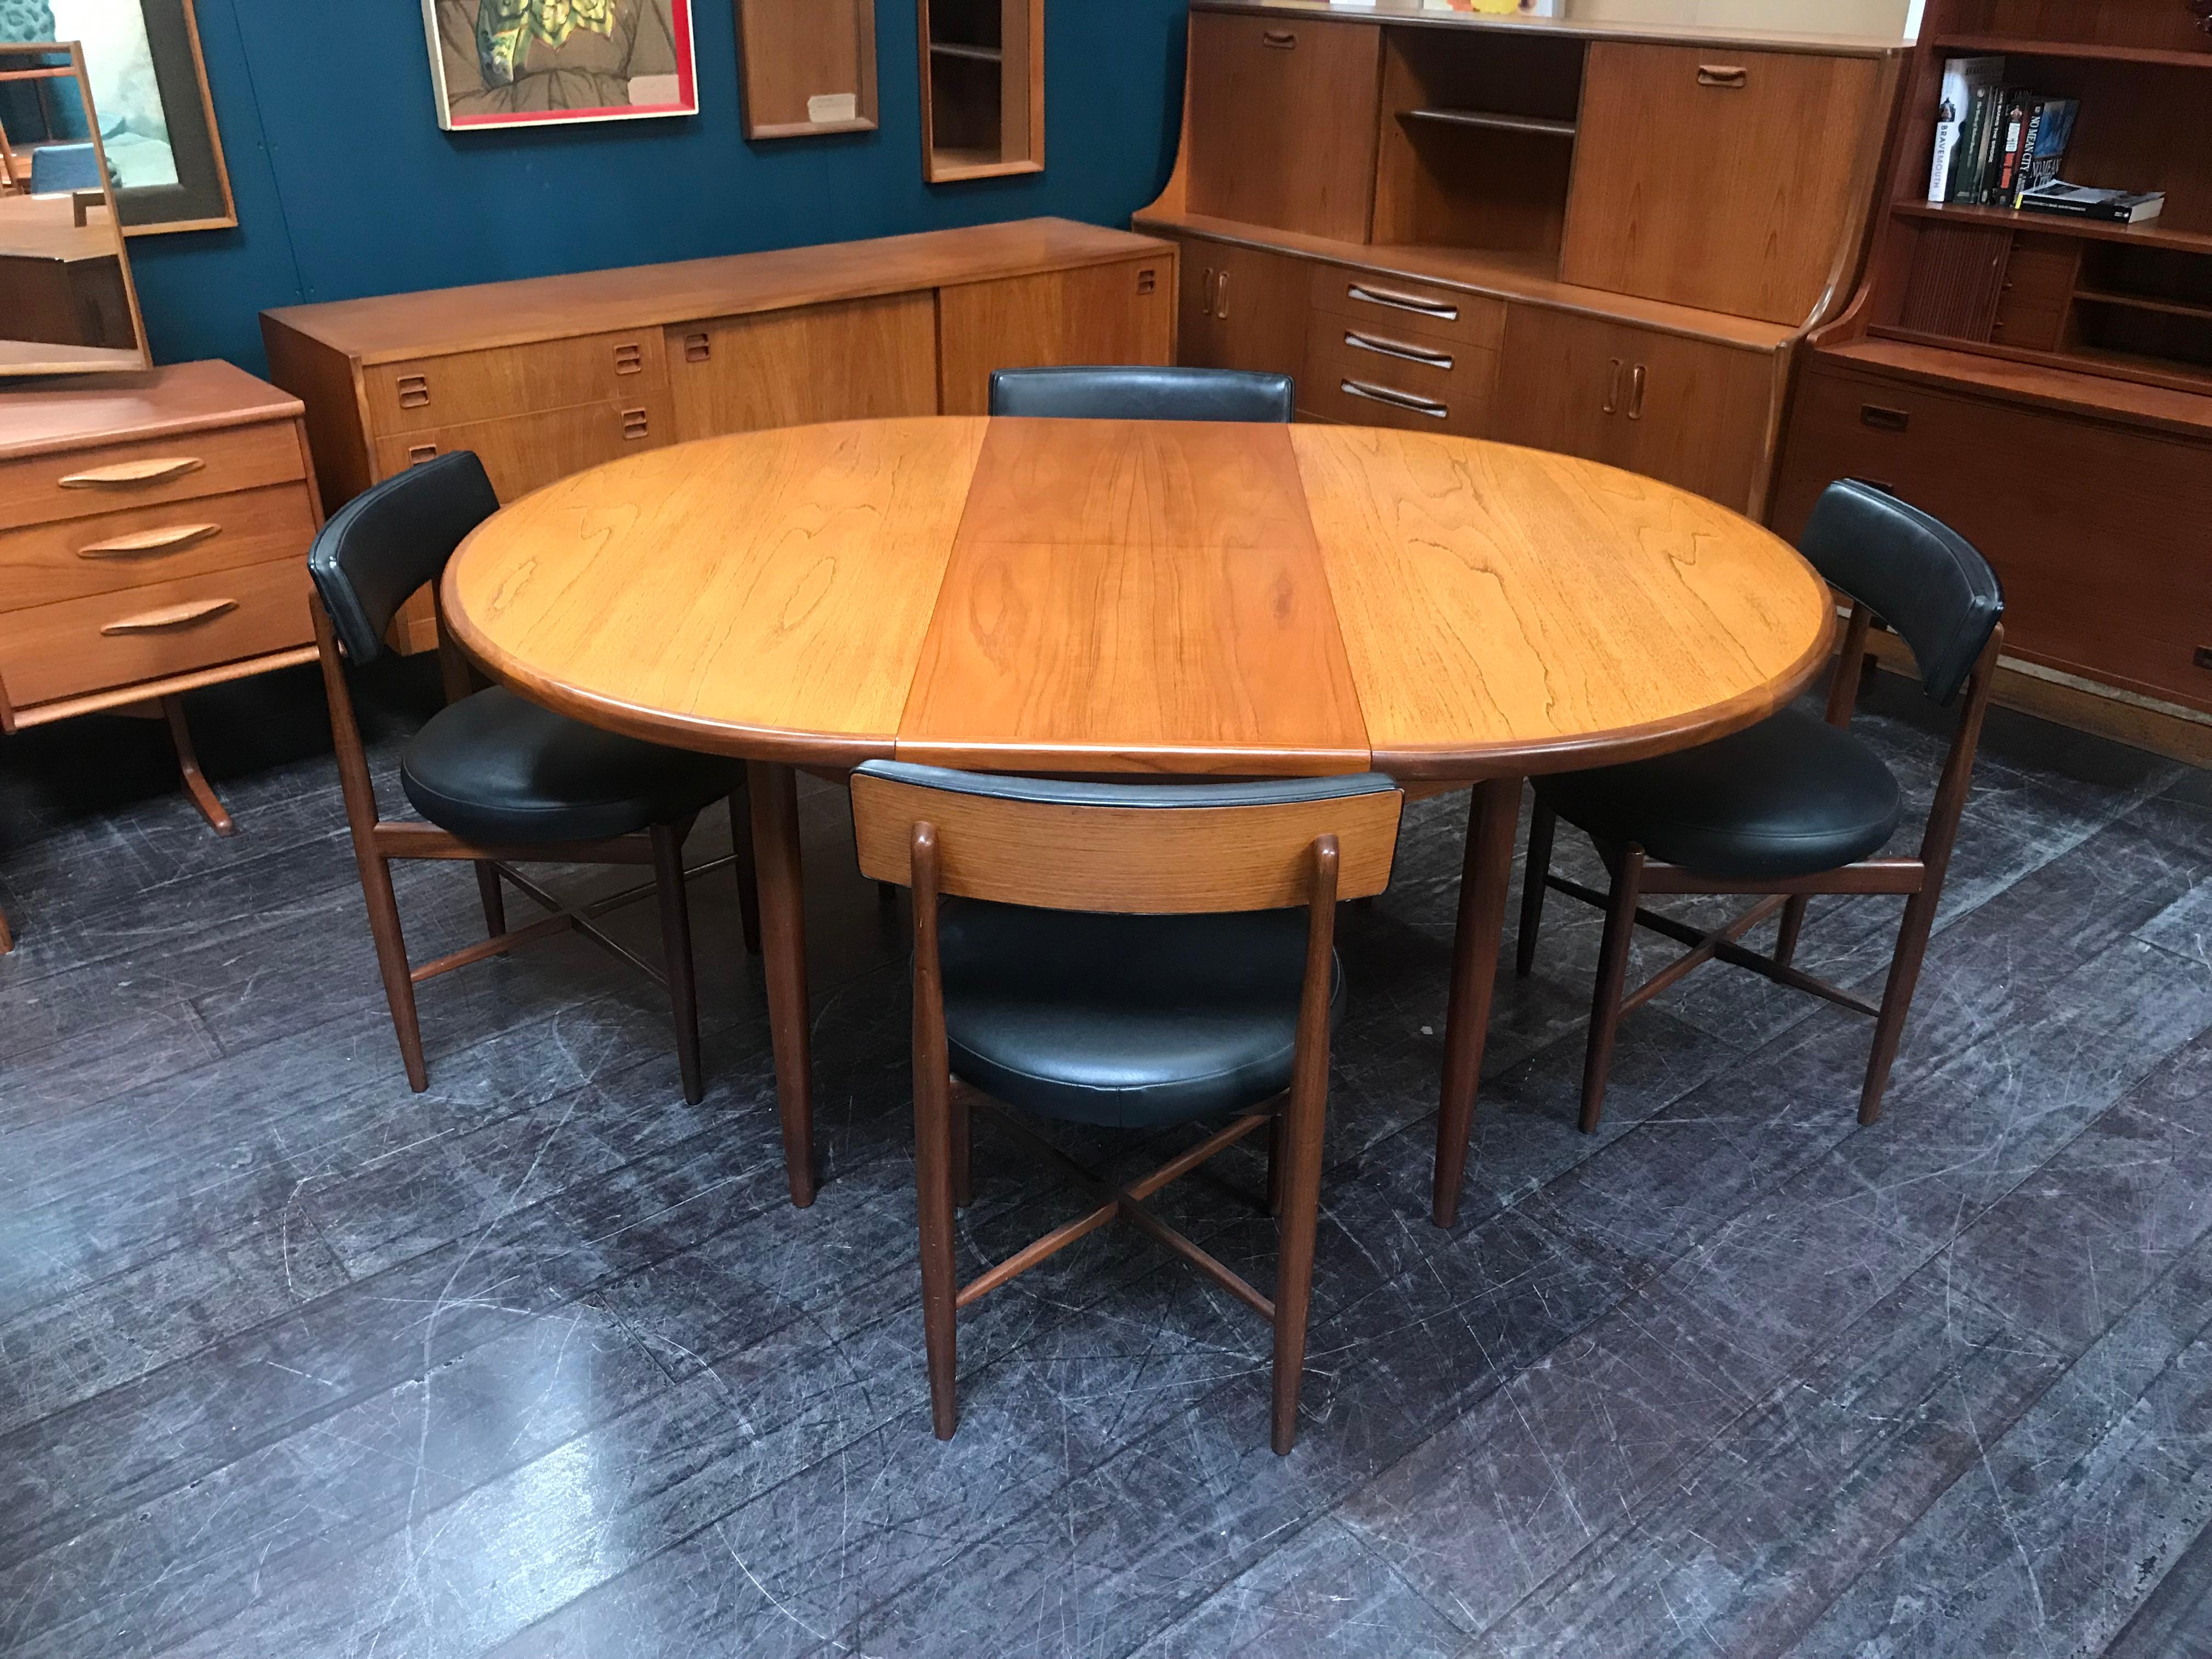 British Midcentury Teak Dining Table G Plan with 4 Chairs by Ib Kofod-Larsen For Sale 1